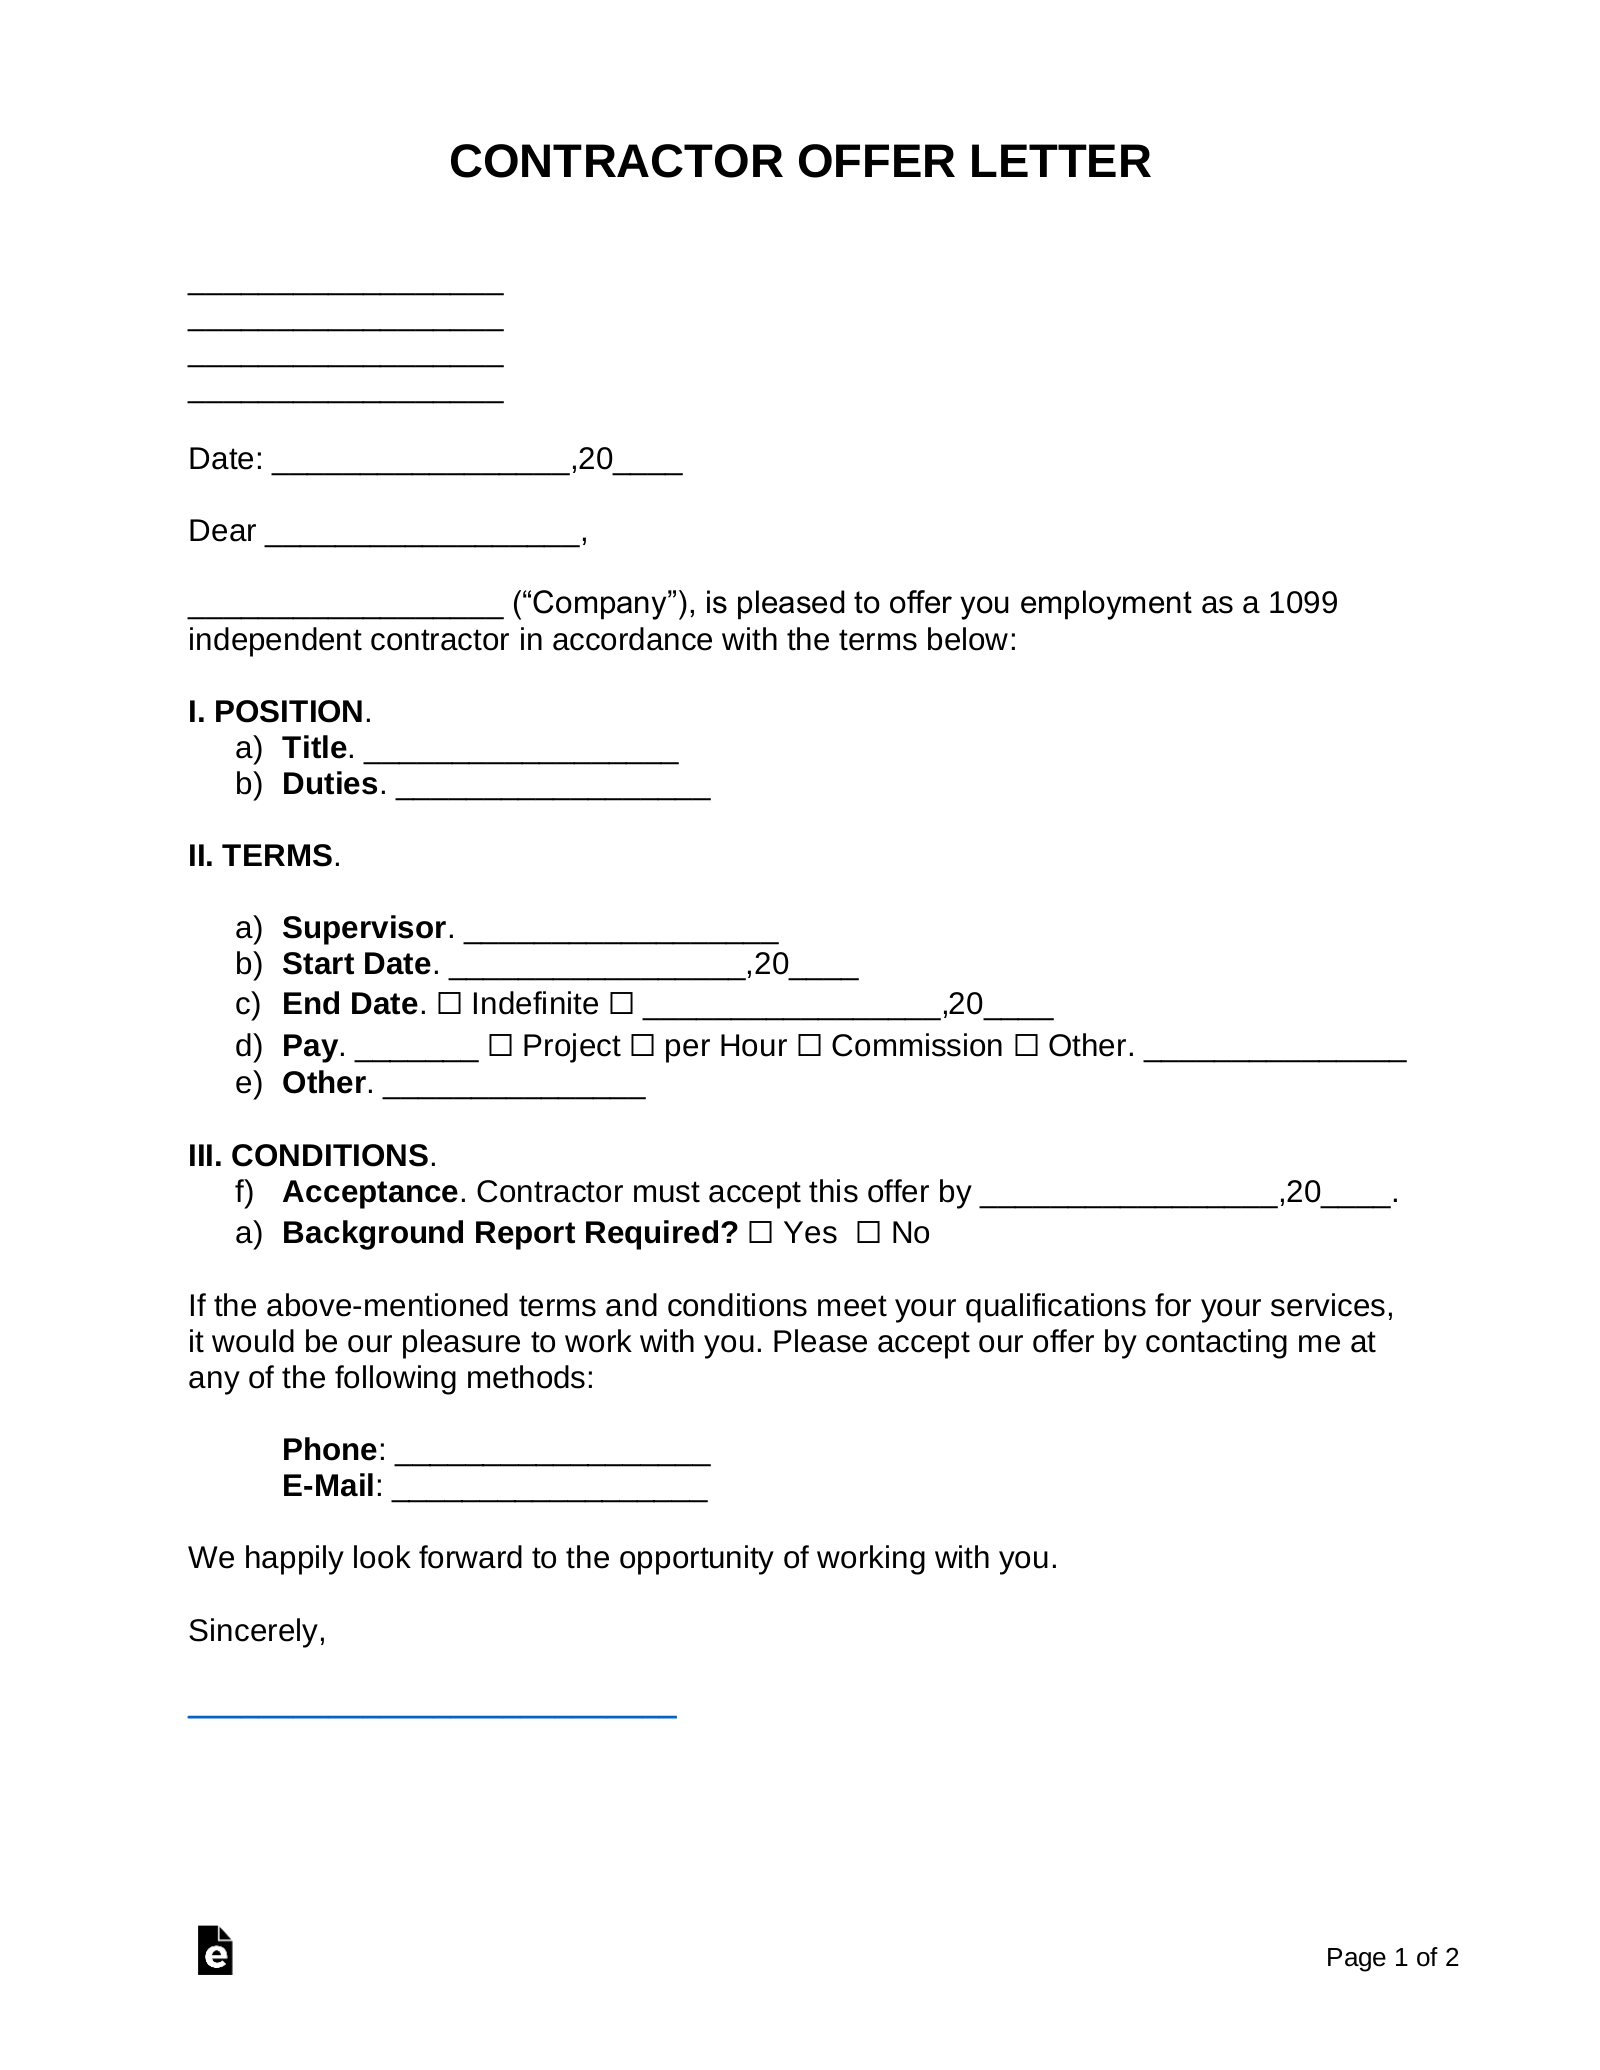 make an appointment letter sample